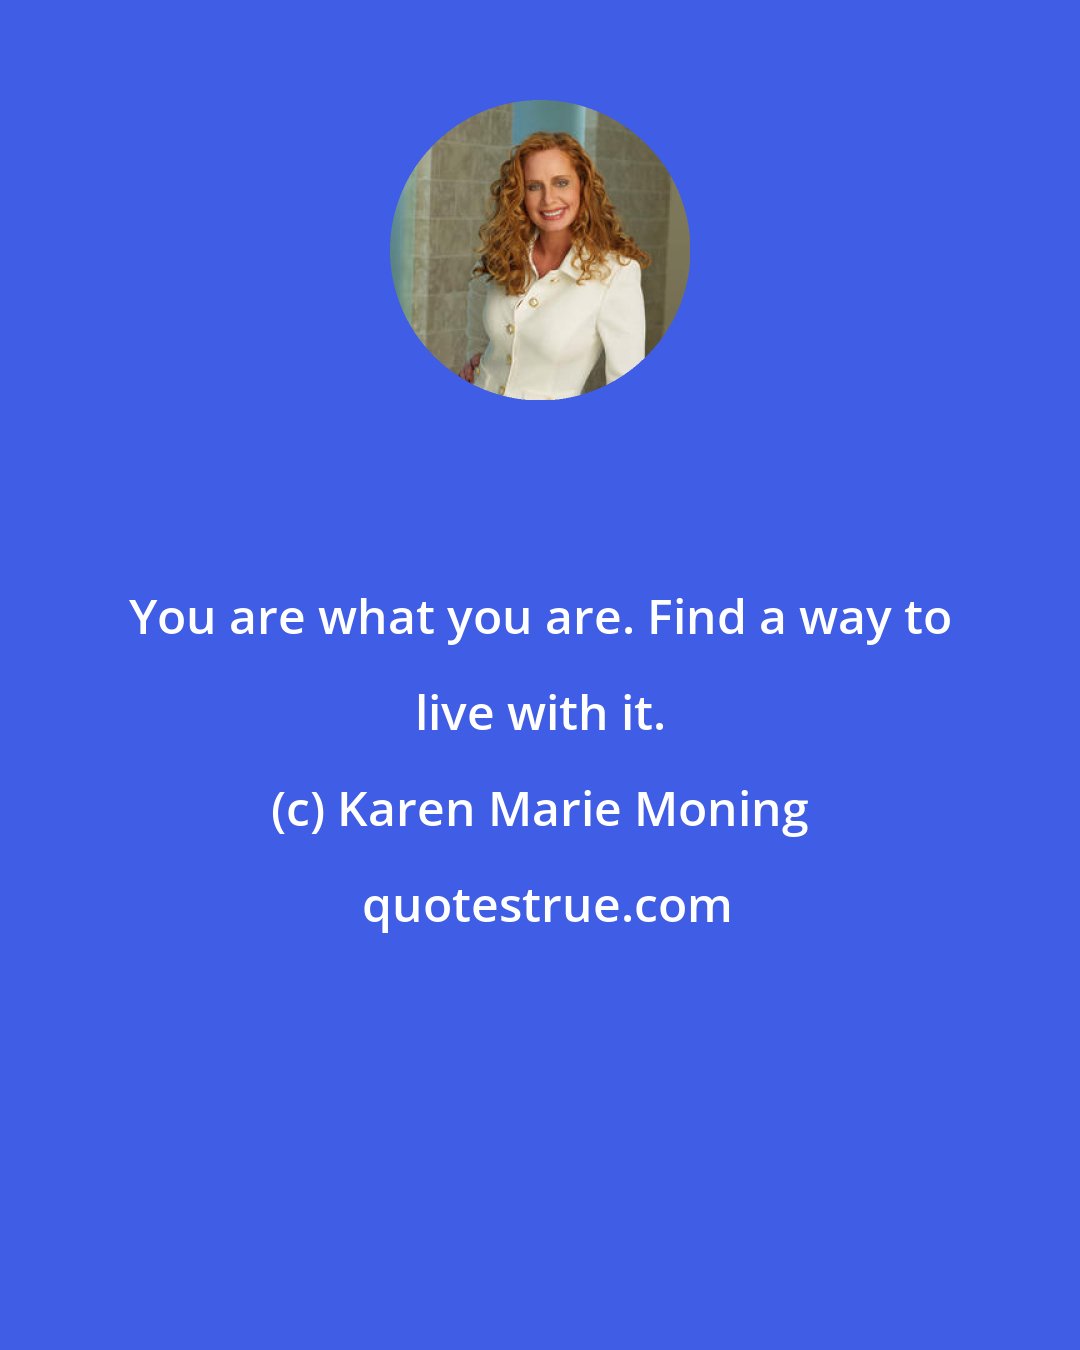 Karen Marie Moning: You are what you are. Find a way to live with it.